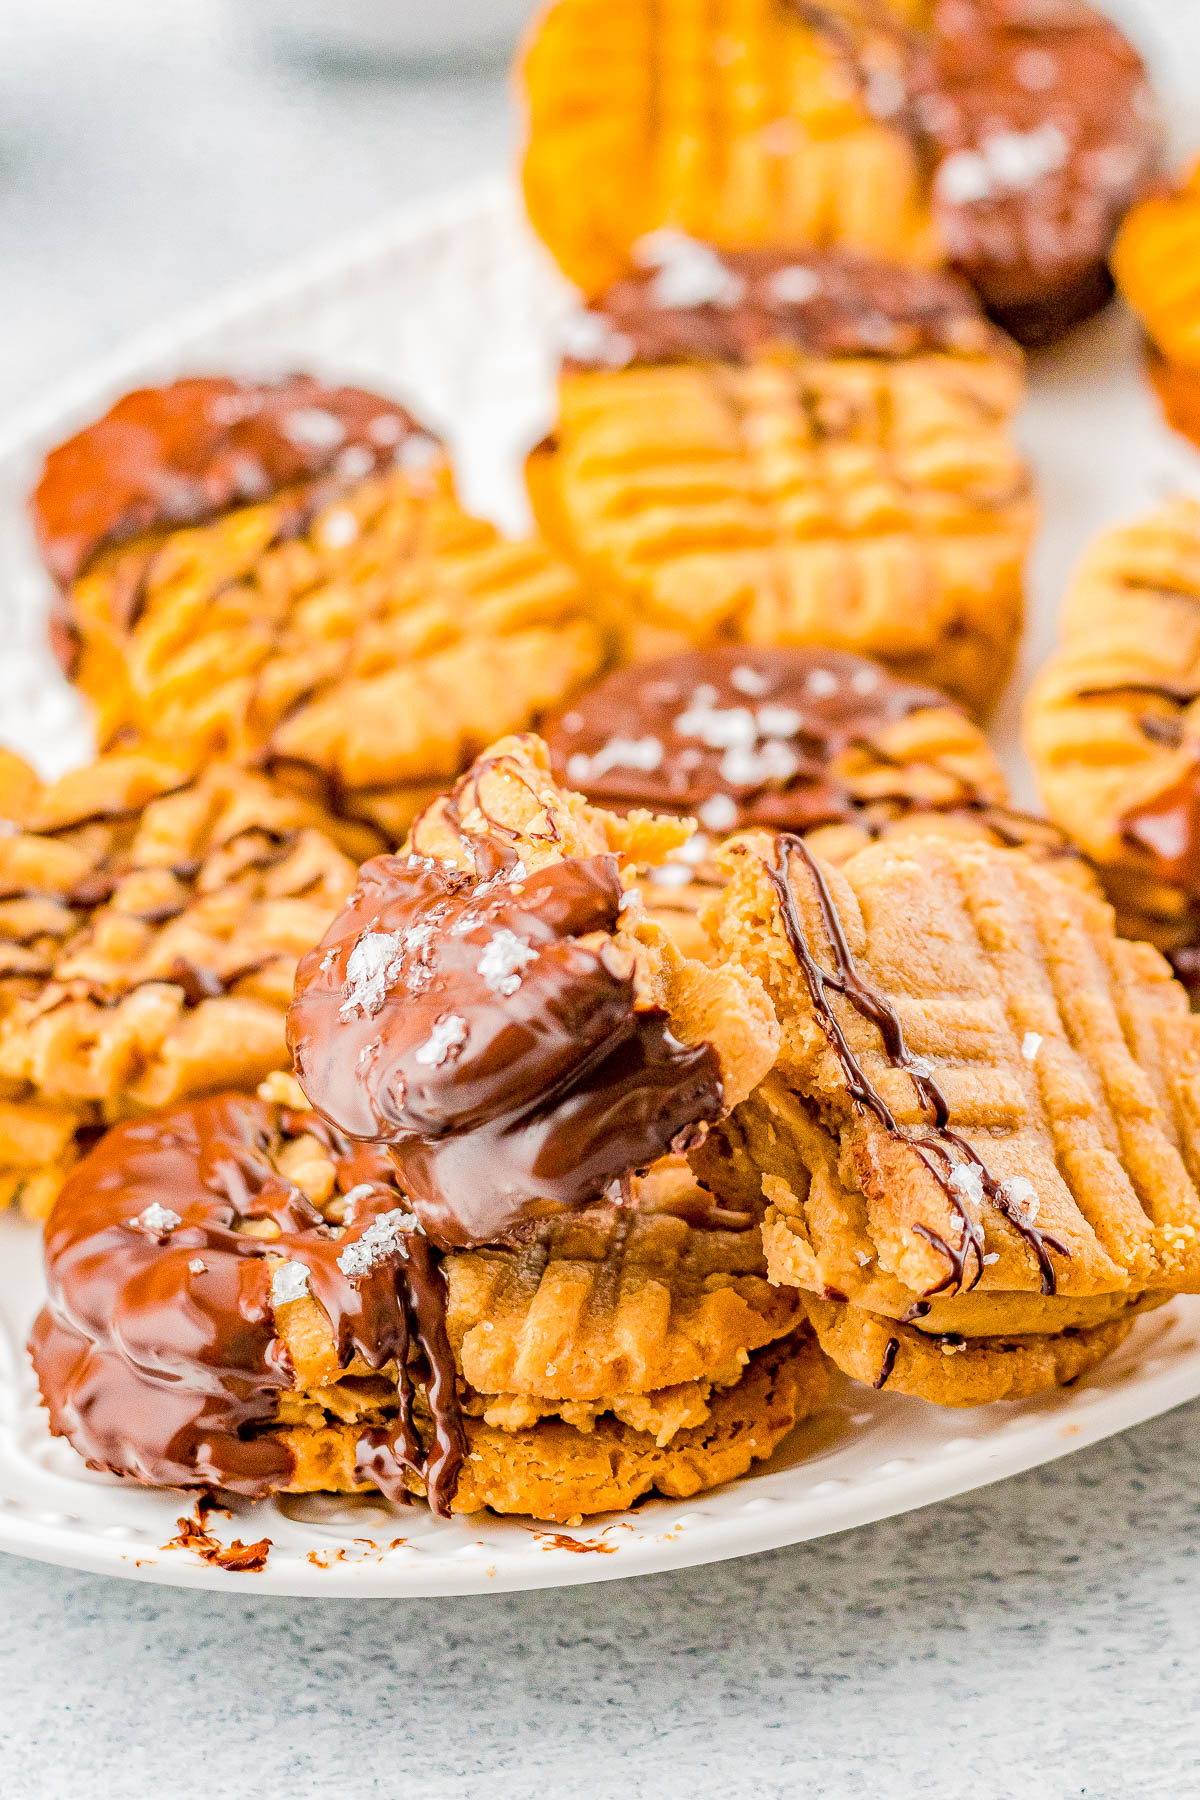 Homemade Nutter Butter Cookies - Homemade copycat Nutter Butters are so much better than the store bought originals! Creamy peanut butter filling is sandwiched between lightly crunchy peanut butter cookies. Pinches of optional sea salt and melted chocolate drizzled over the tops make these cookies simply THE BEST! 